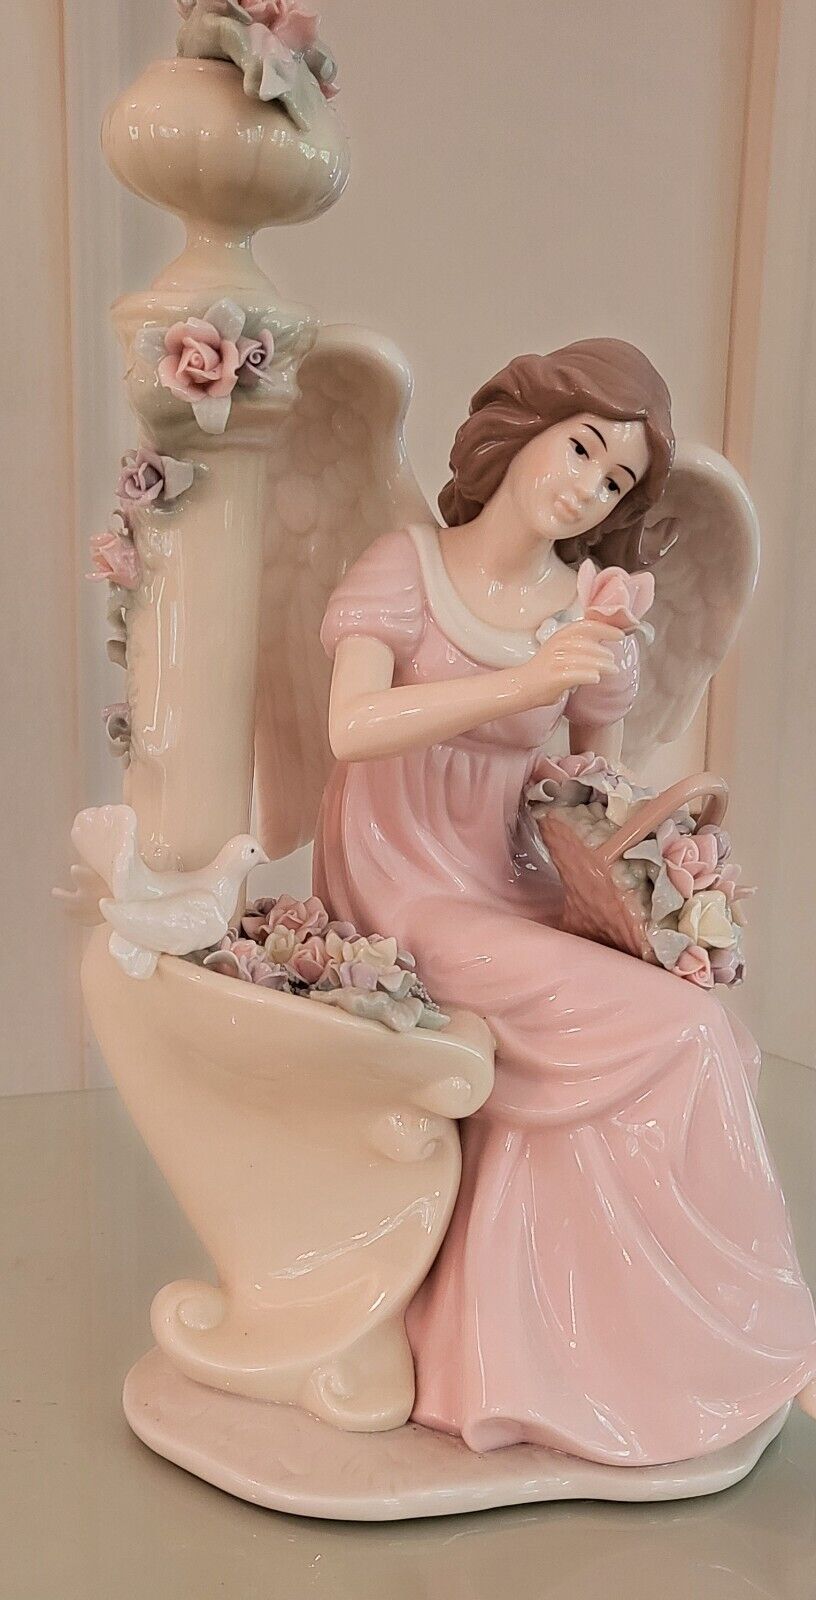 HAND PAINTED PORCELAIN ANGEL FIGURINE 2005 w/ Dove and Flowers from Members Mark